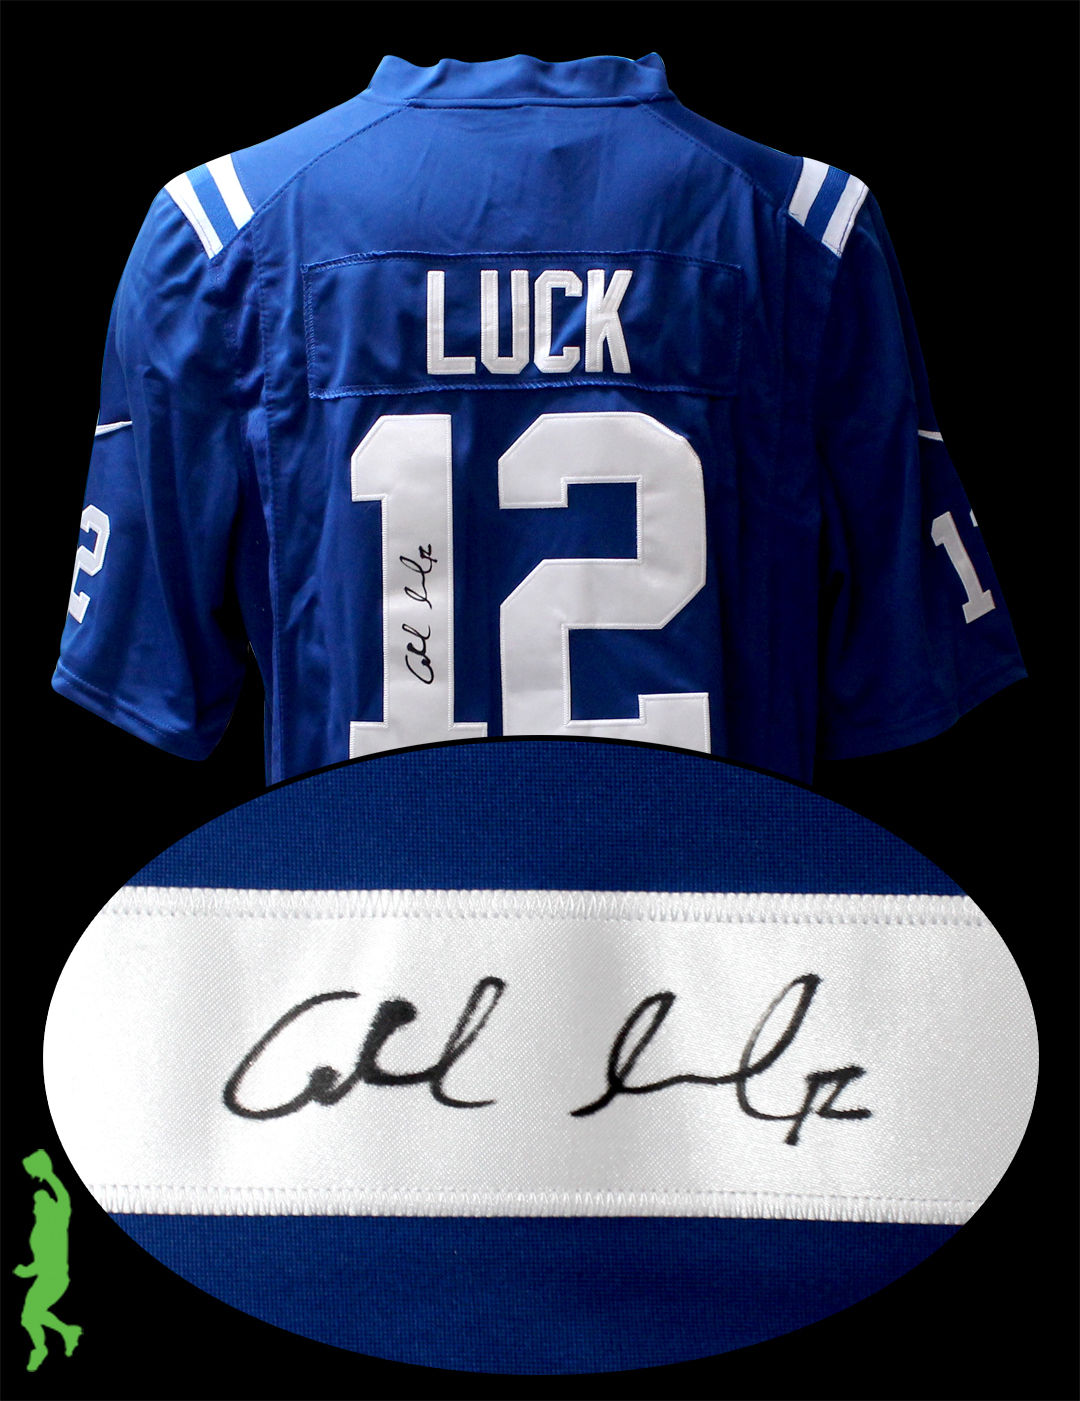 ANDREW LUCK AUTOGRAPHED SIGNED INDIANAPOLIS COLTS FOOTBALL JERSEY JSA COA